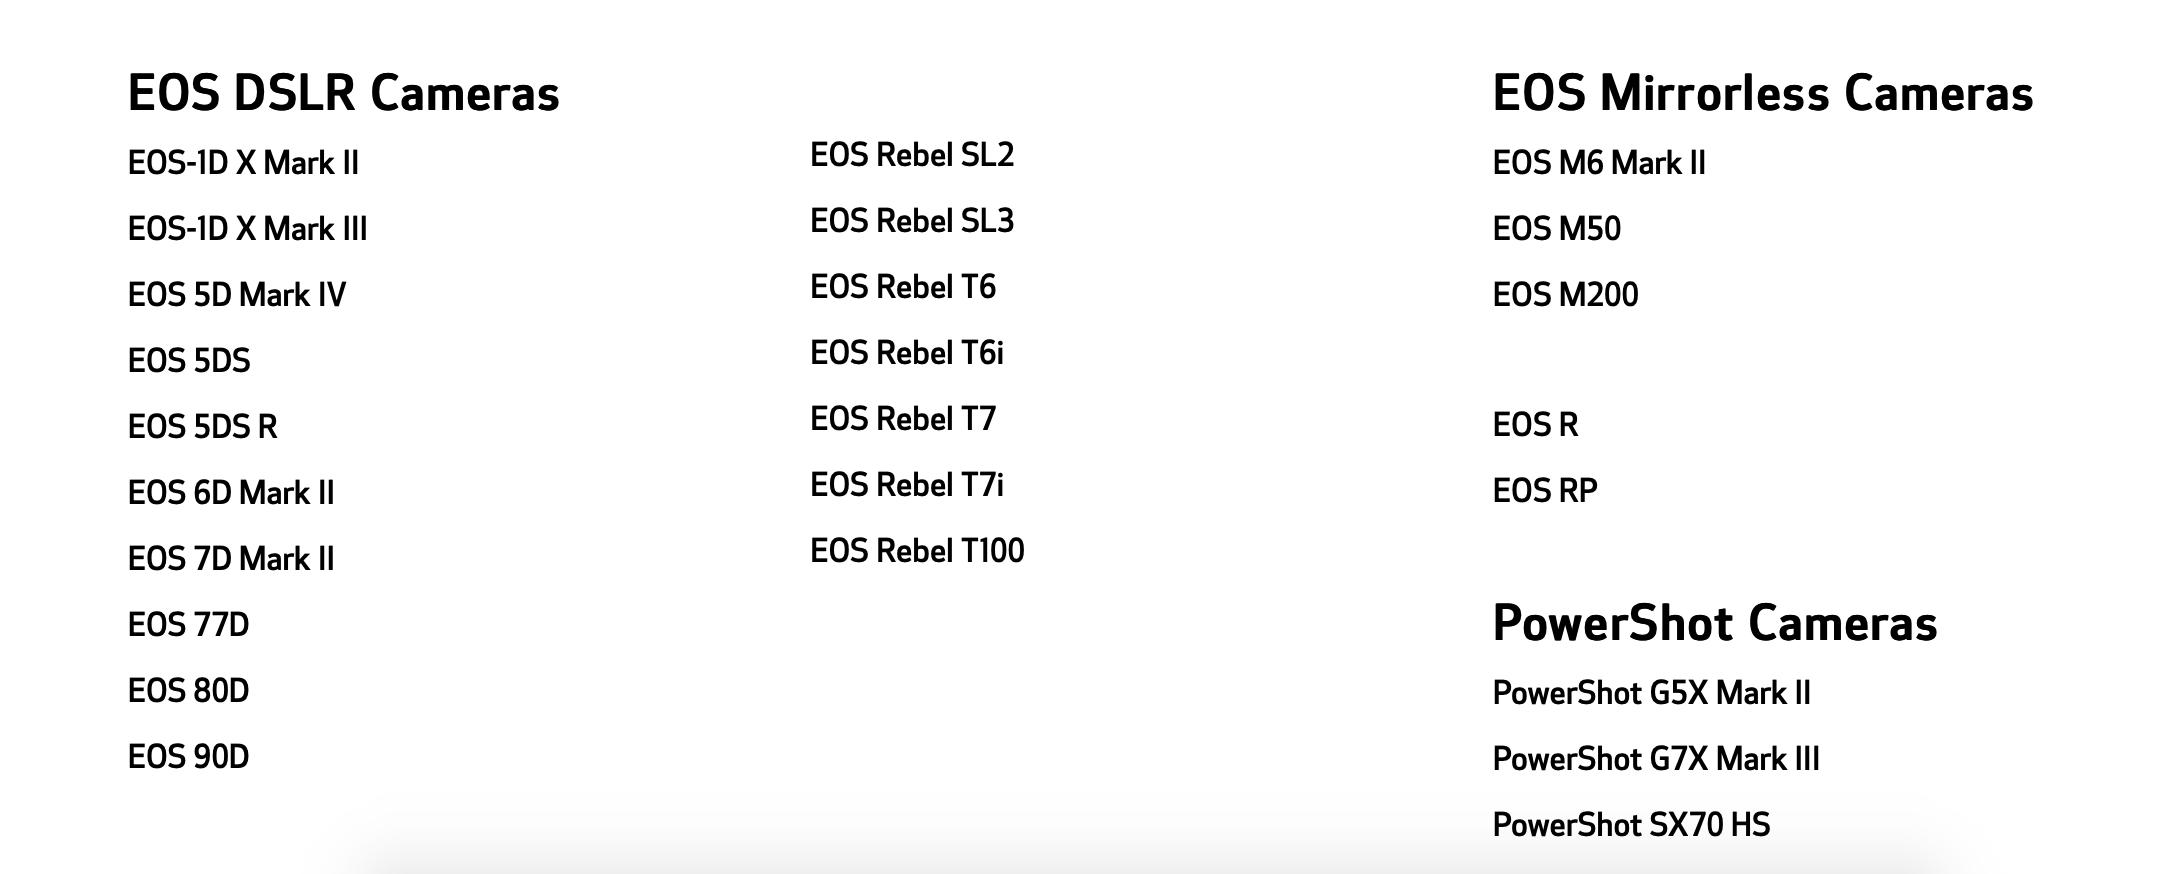 A picture of a screen displaying a list of EOS DSLR cameras, EOS mirrorless cameras and PowerShot cameras